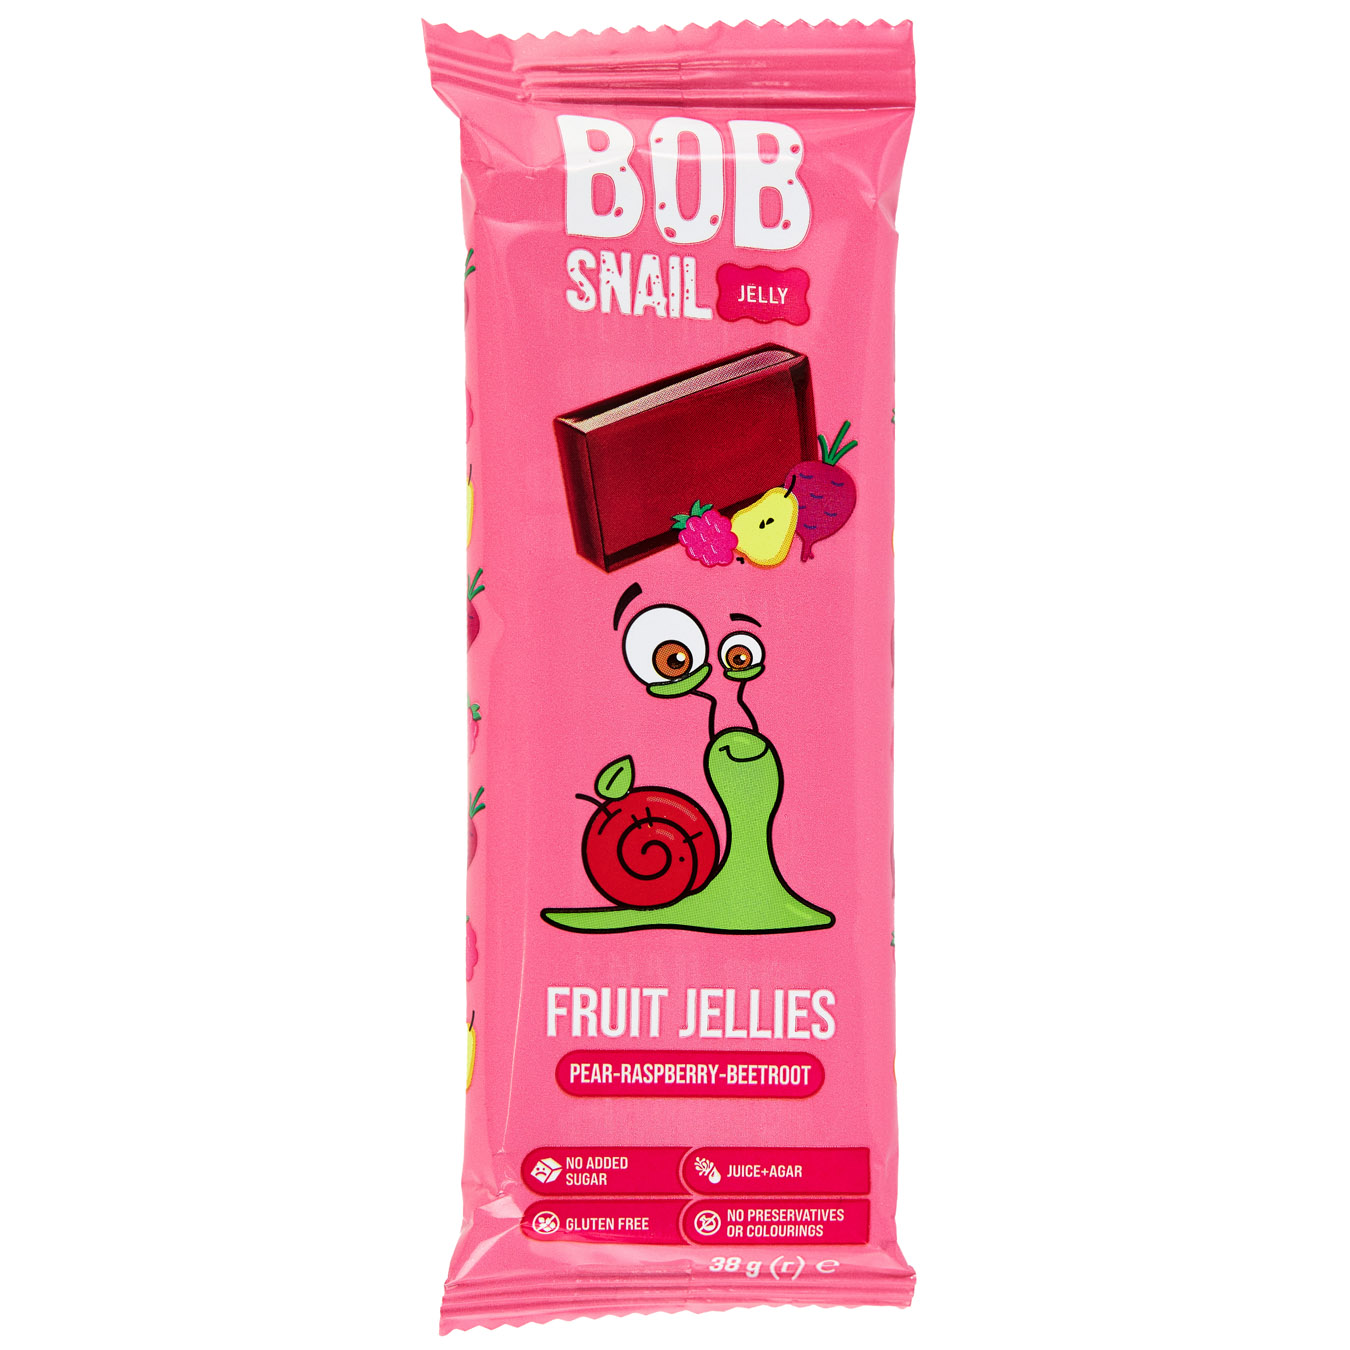 Marmalade Bob Snail fruit and vegetable Pear-raspberry-beet without sugar 38g